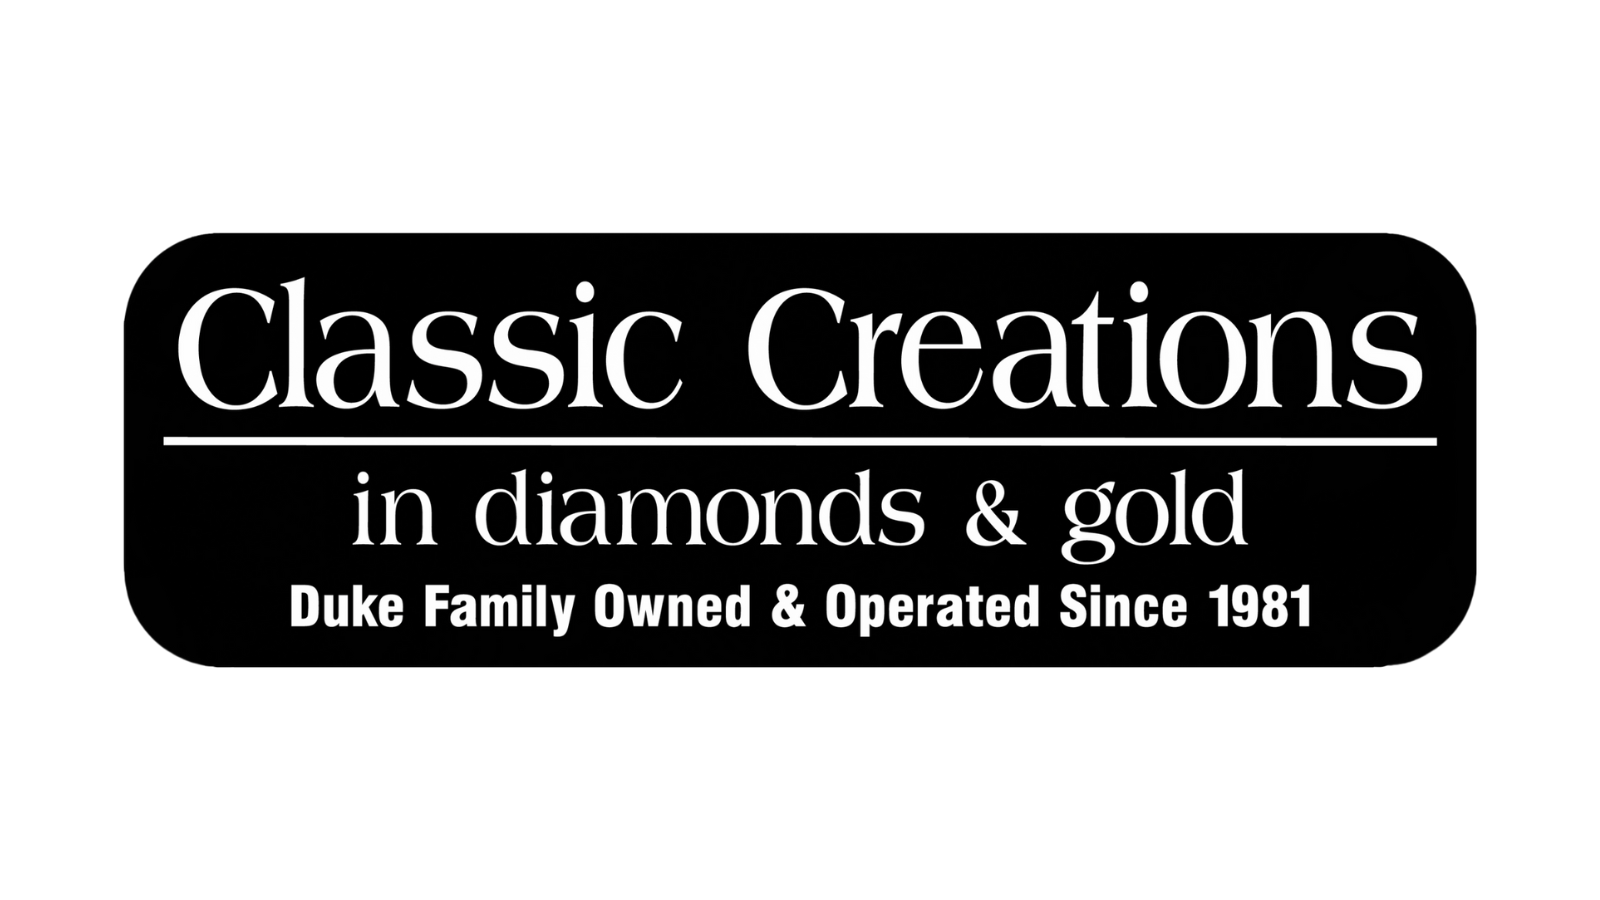 Classic Creations in Diamonds & Gold